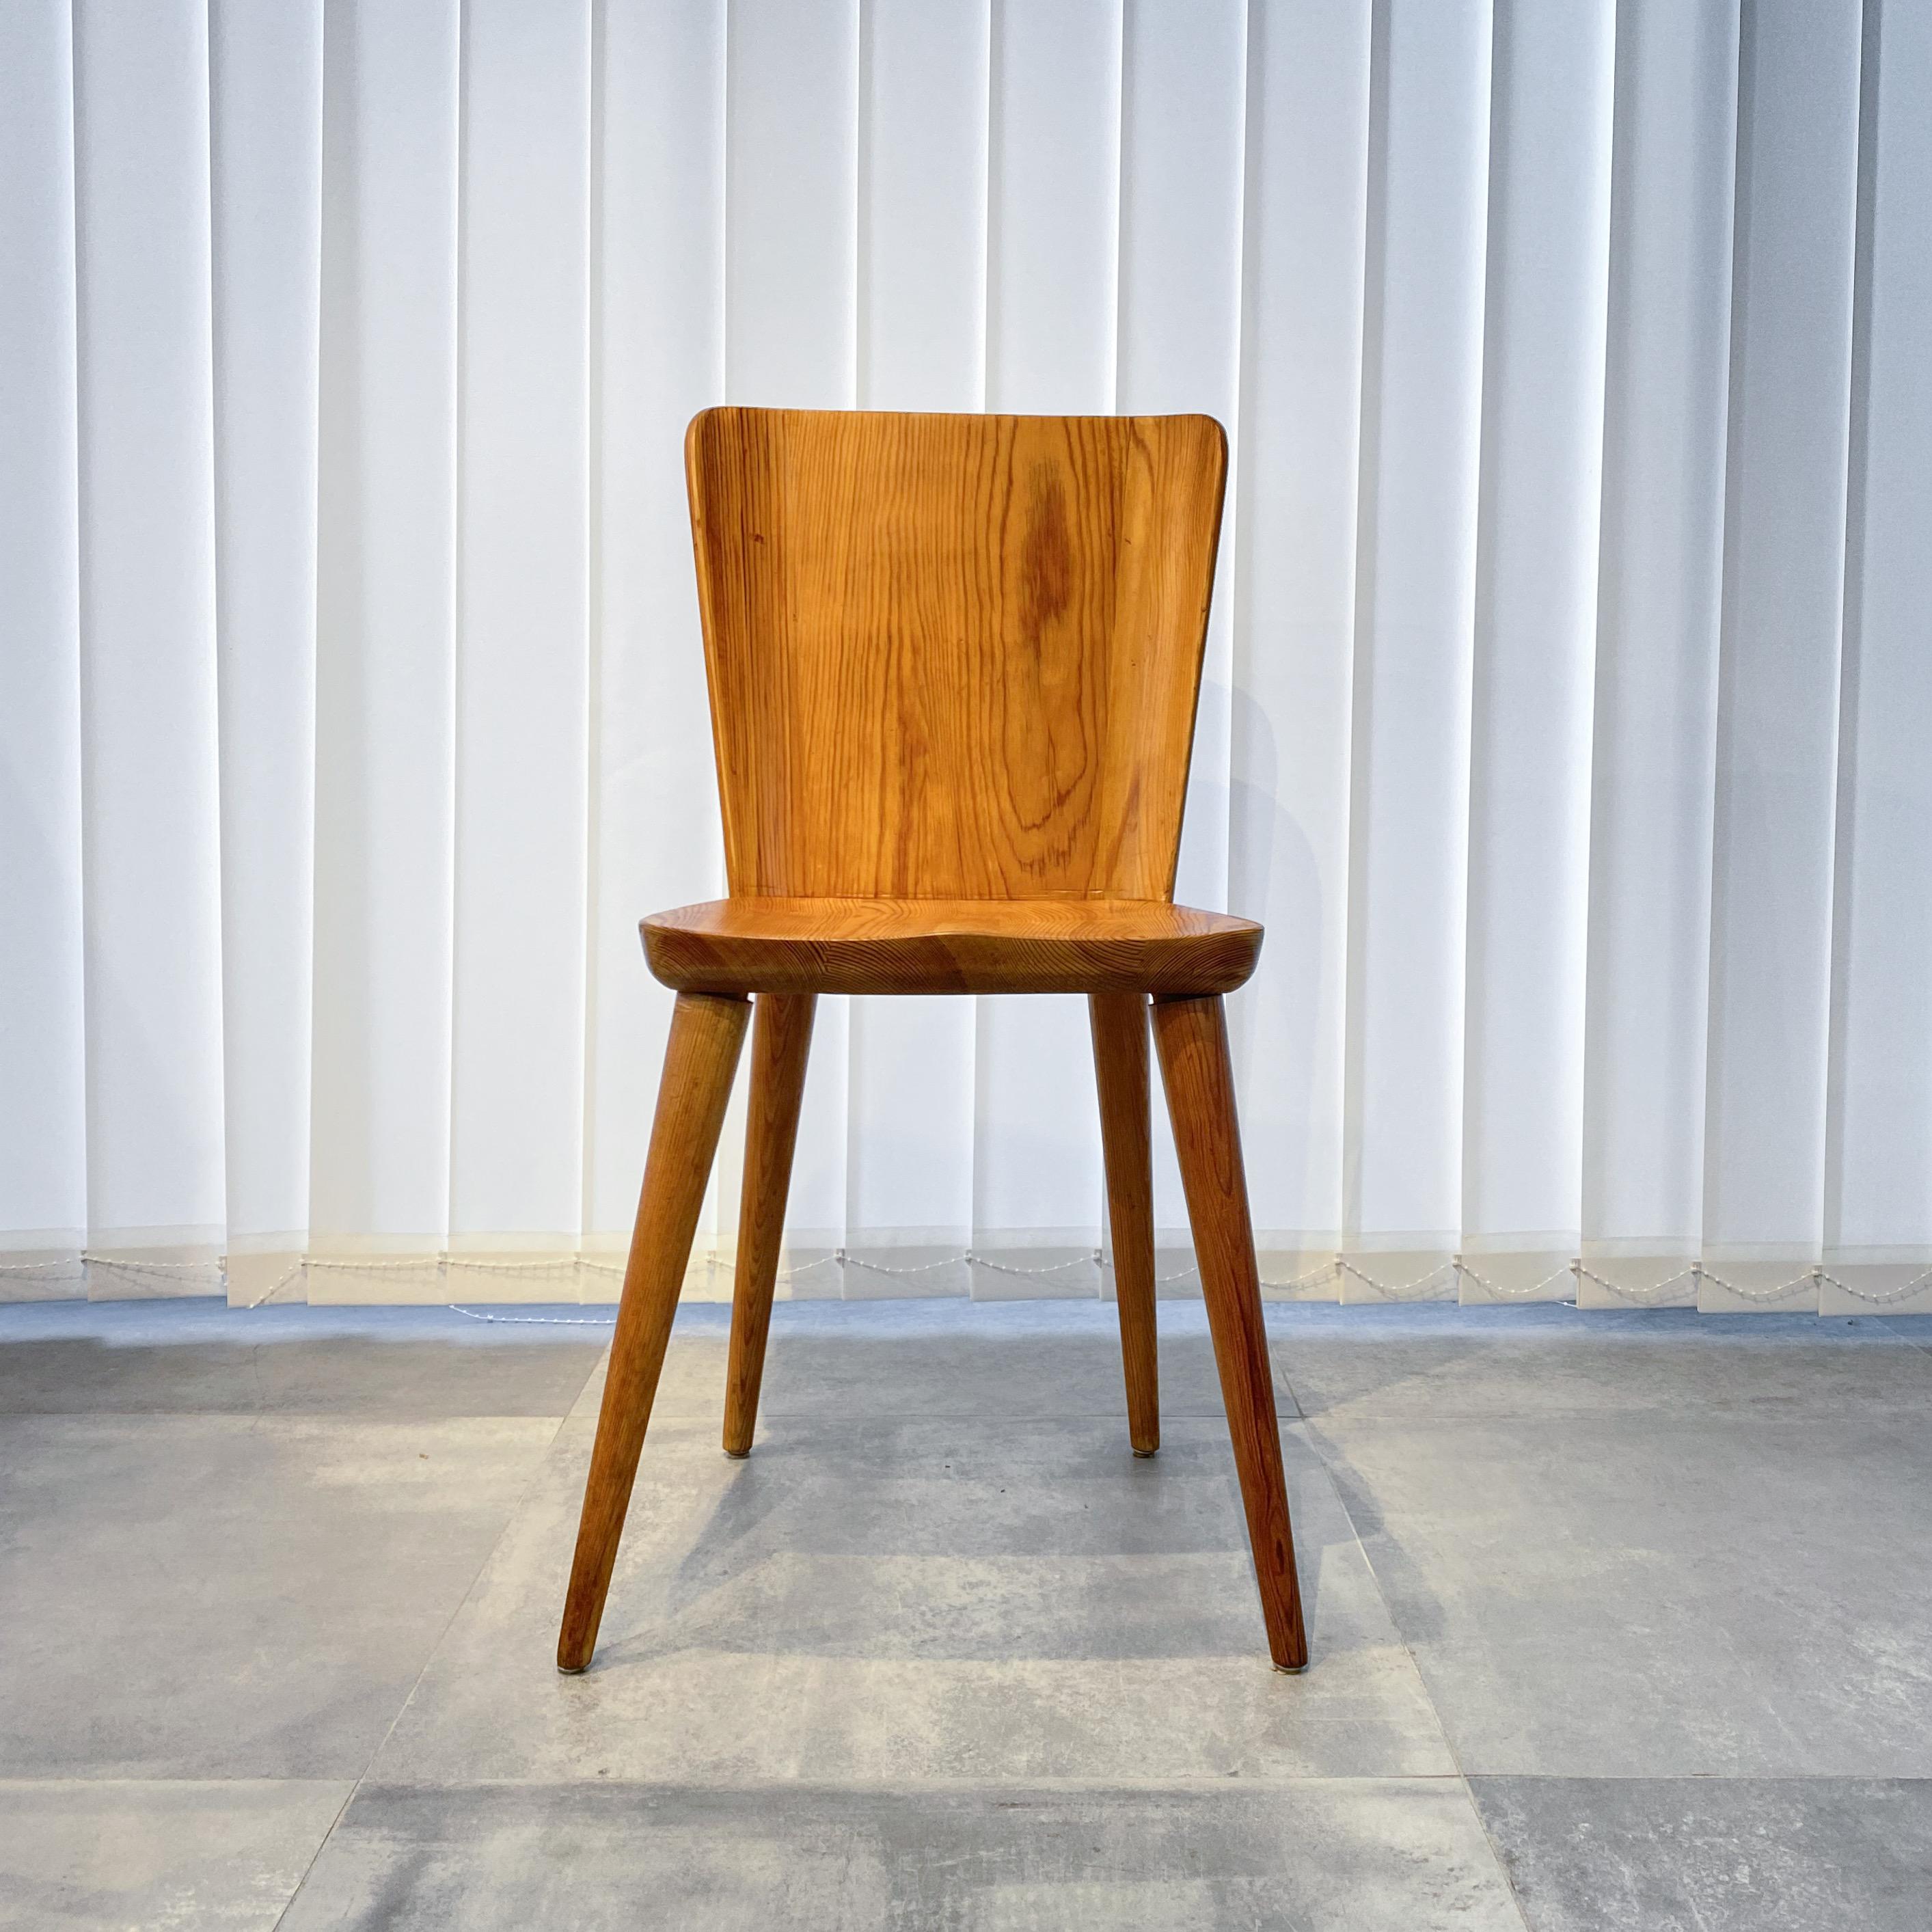 Swedish side chair, Model 510, designed by Göran Malmvall for the manufacturer Karl Andersson & Söner, Huskvarna. Originating from the late 1940s, it is a late example of the 